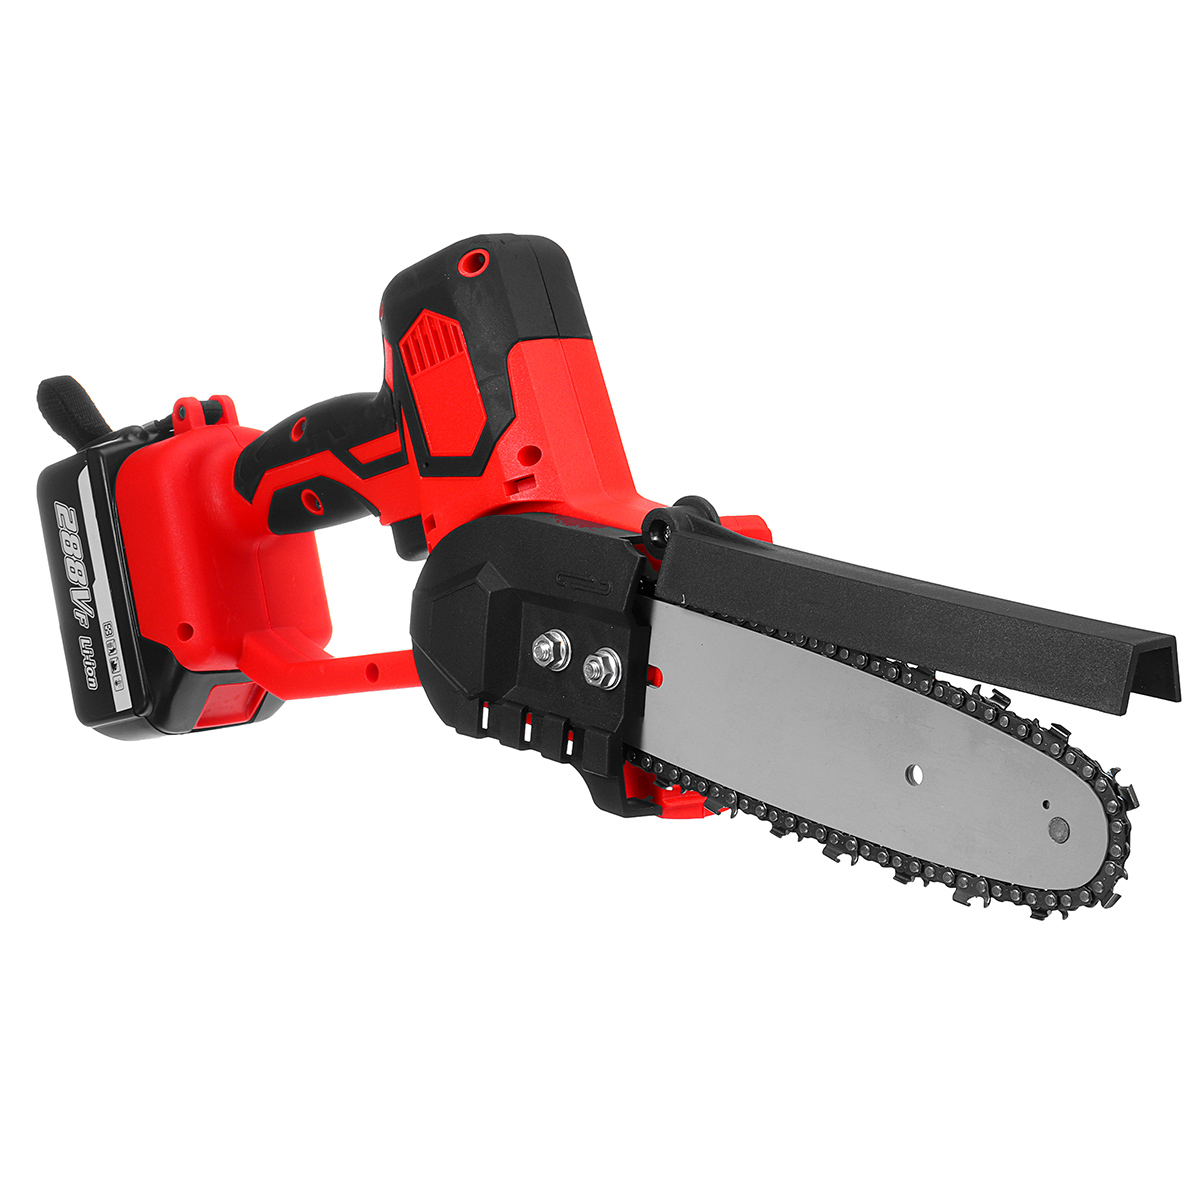 8-Inch-Cordless-Electric-Chain-Saw-288VF--Brushless-Motor-Power-Tools-Chainsaw-1854536-9